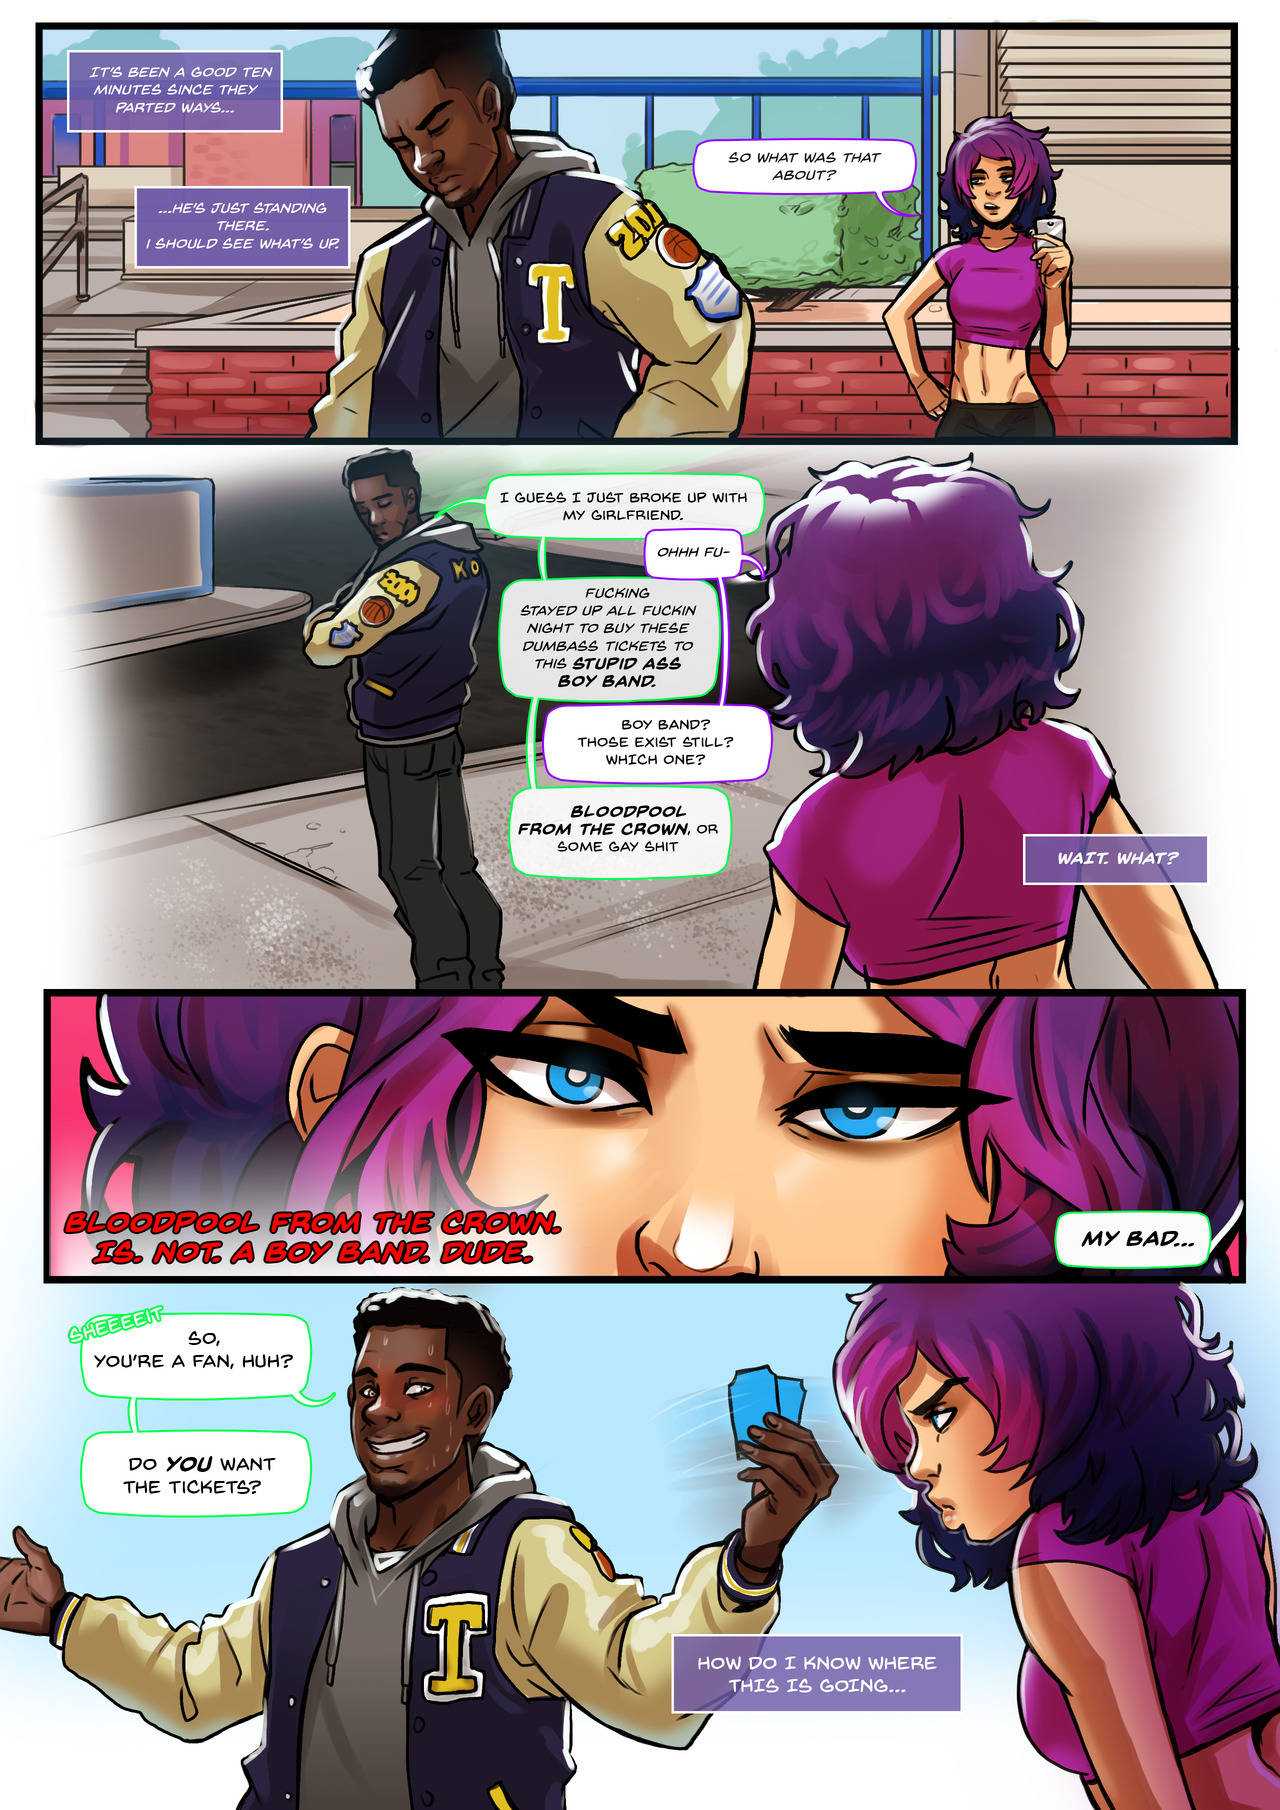 The Backdoor Pass (ft. Pelo) by Andava page 2